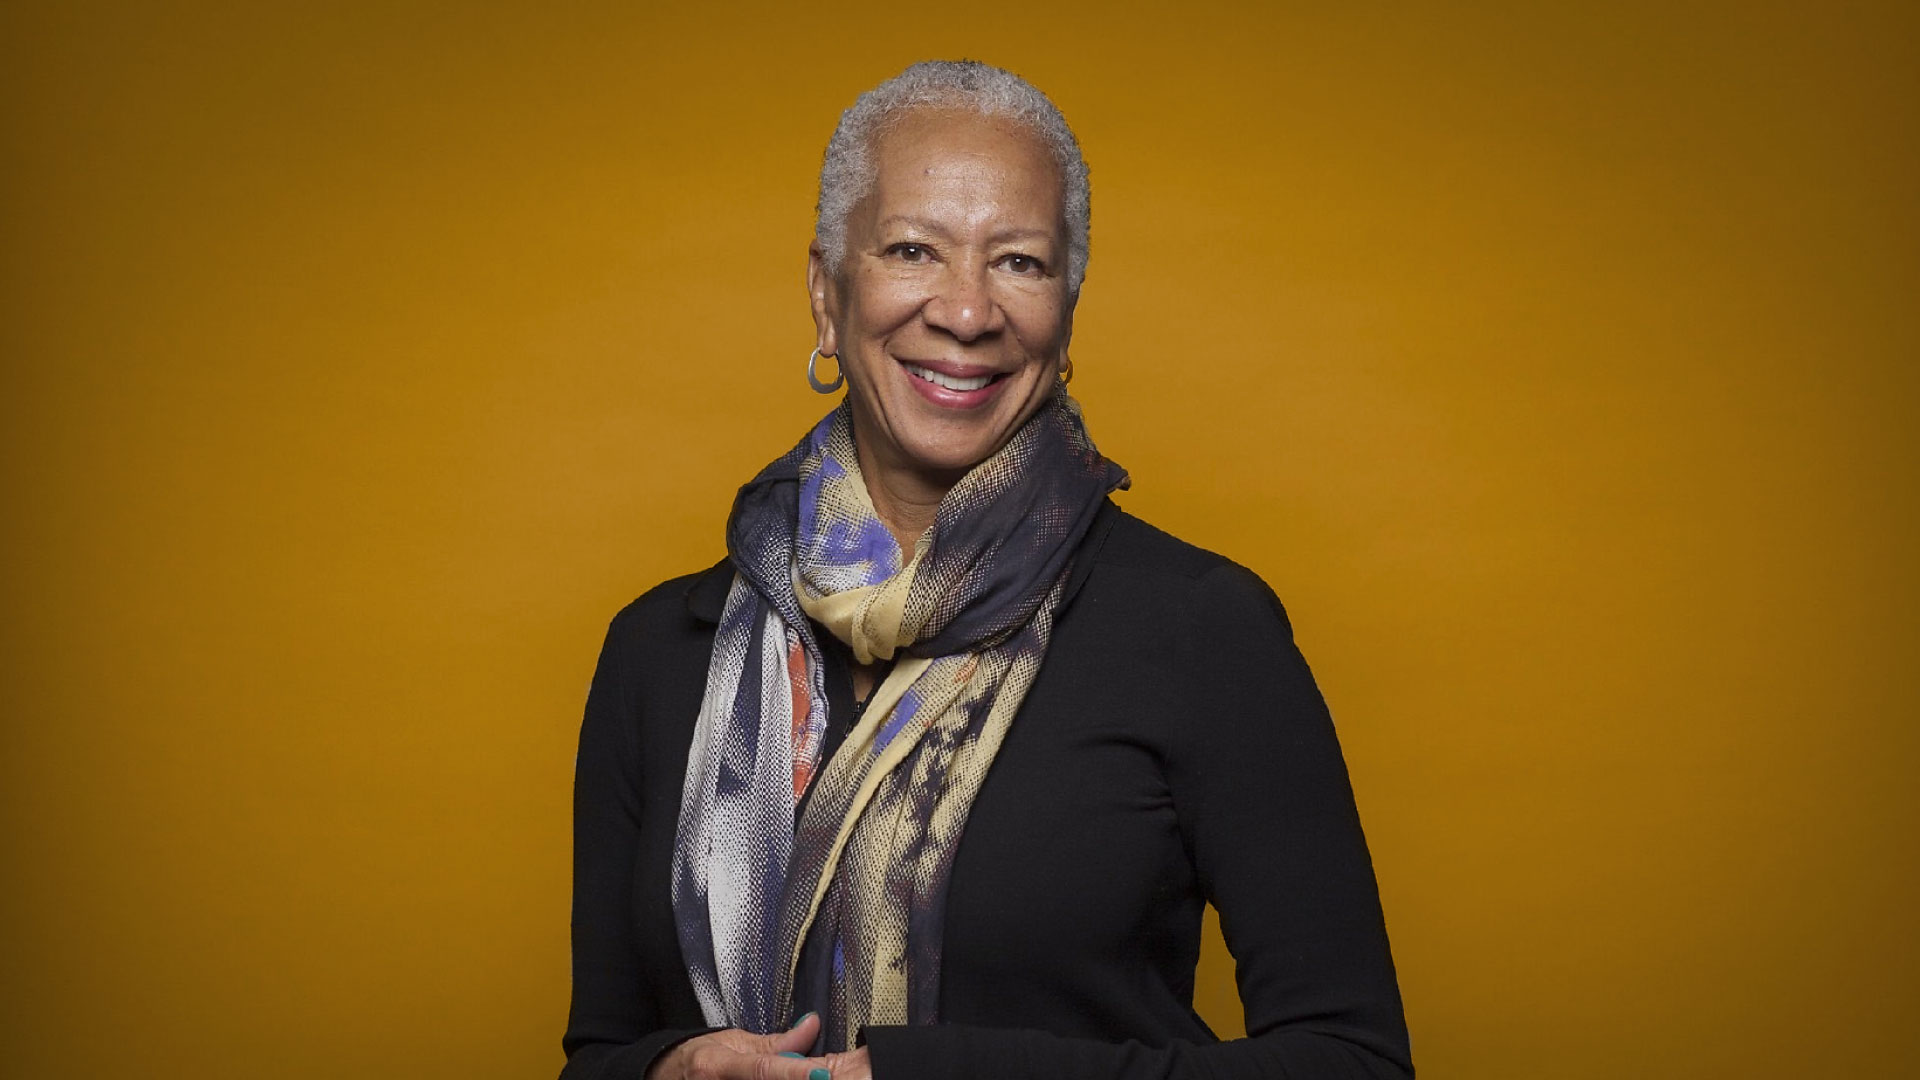 Unfinished Welcomes Angela Glover Blackwell As Network Chairperson